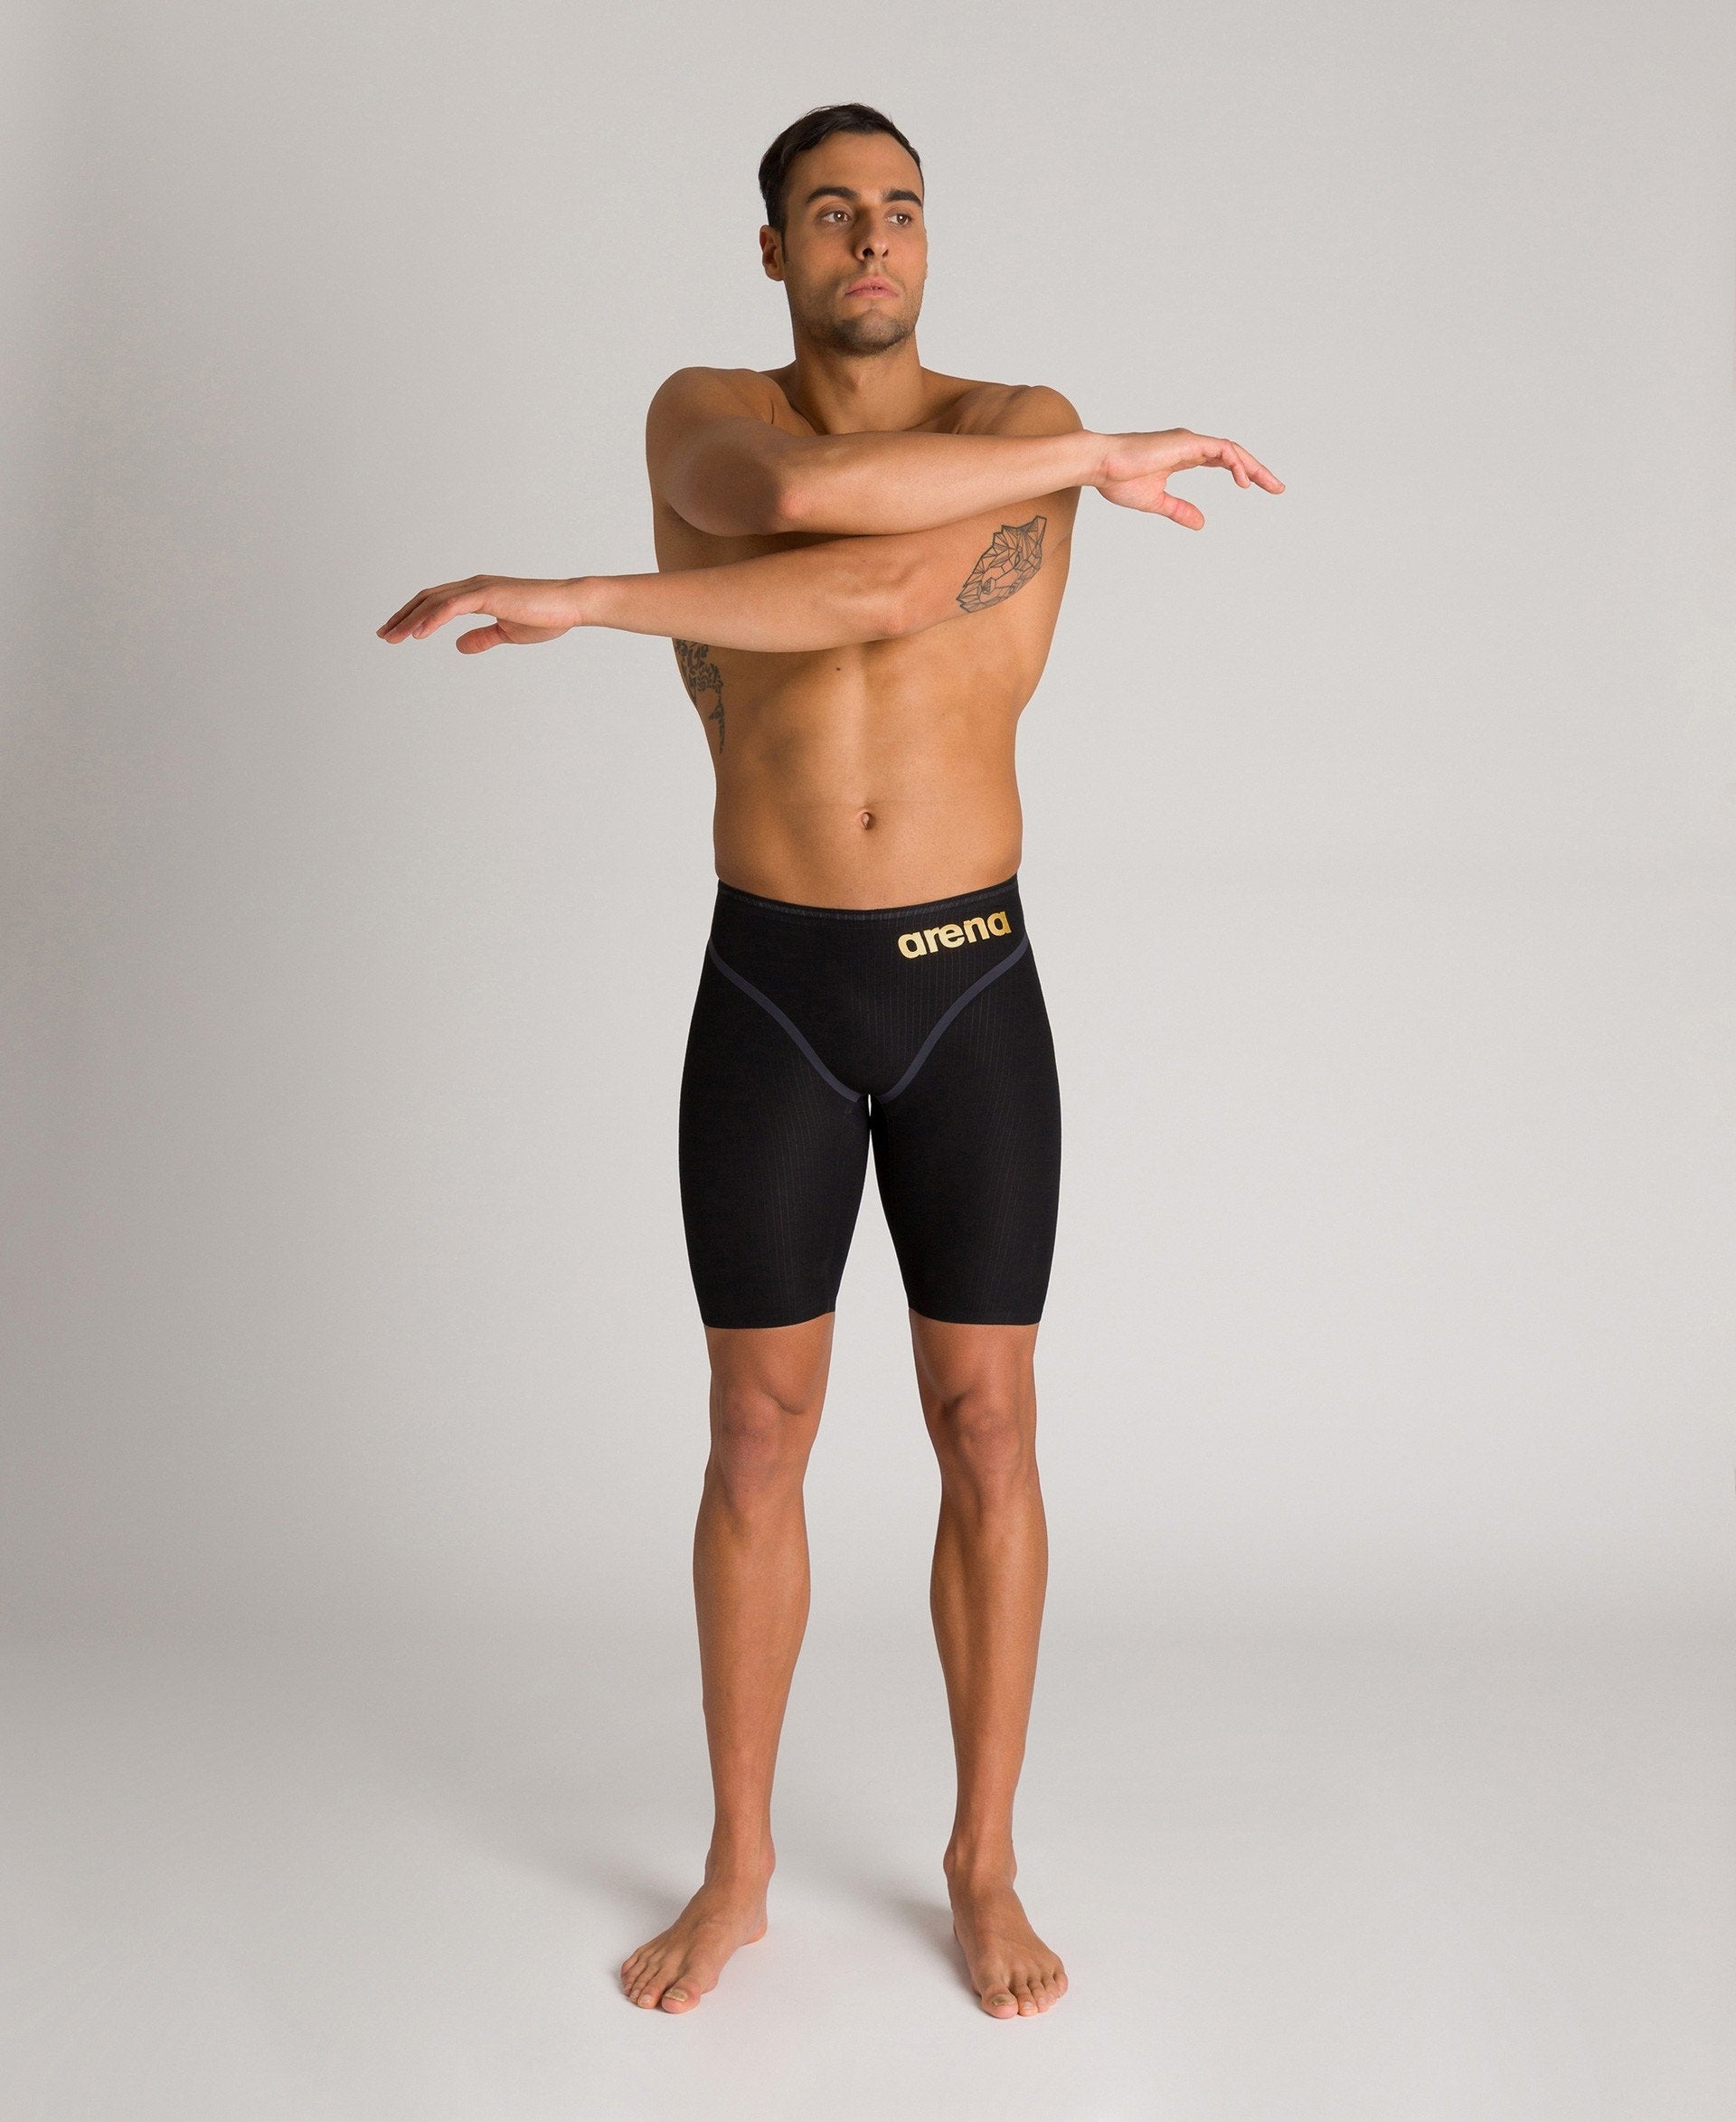 MEN POWERSKIN CARBON-CORE FX JAMMER – FINA APPROVED